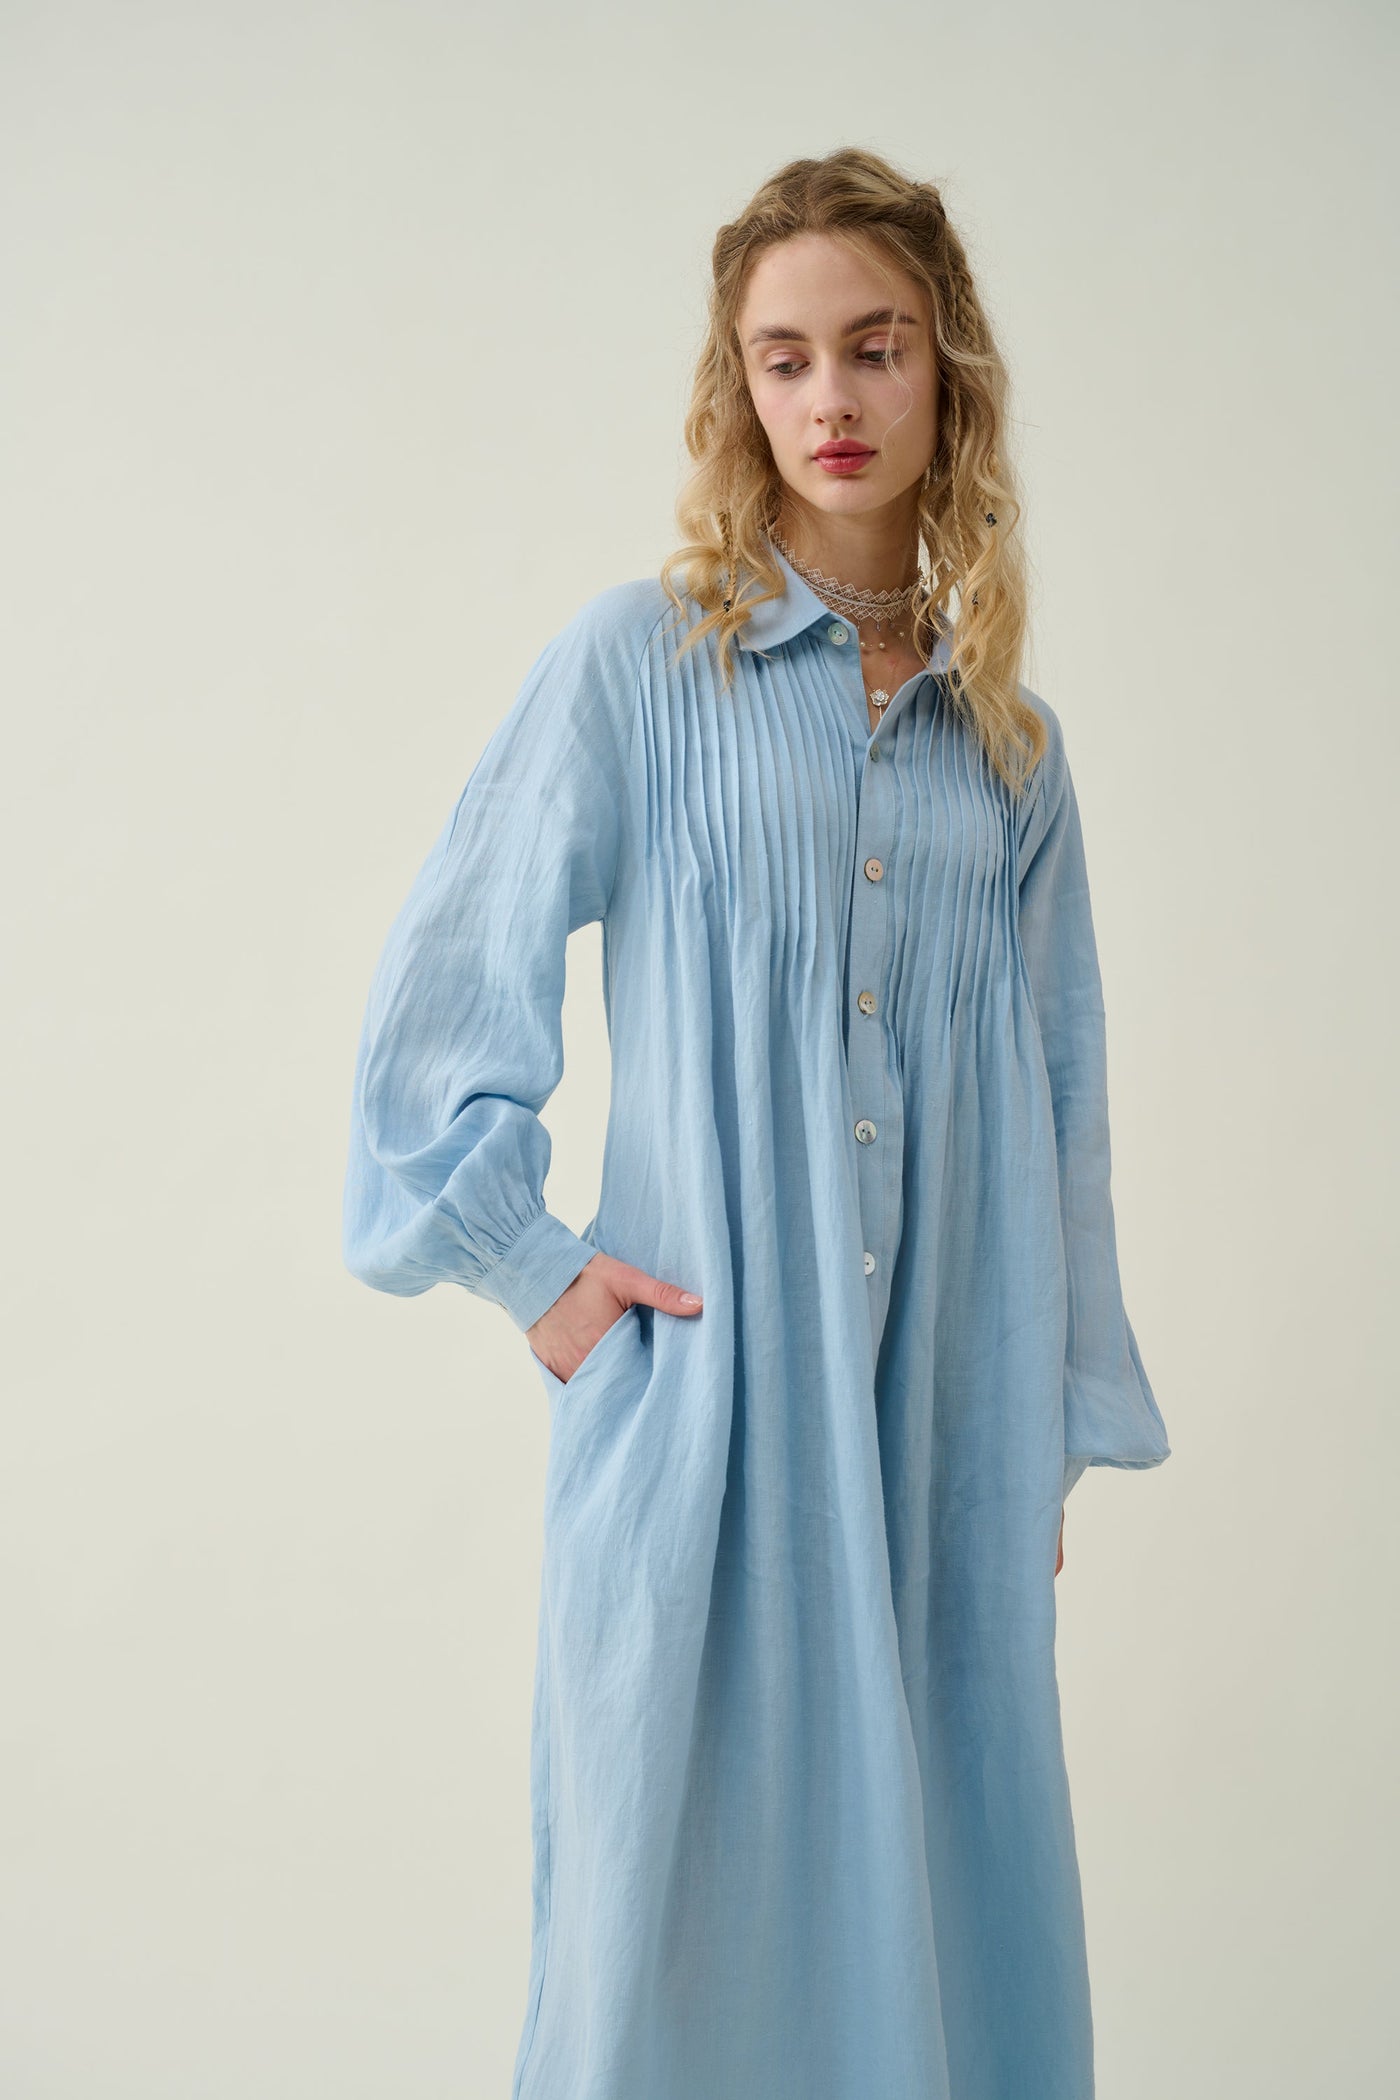 COS's Relaxed Linen Shirt Dress Is Perfect for the Heatwave